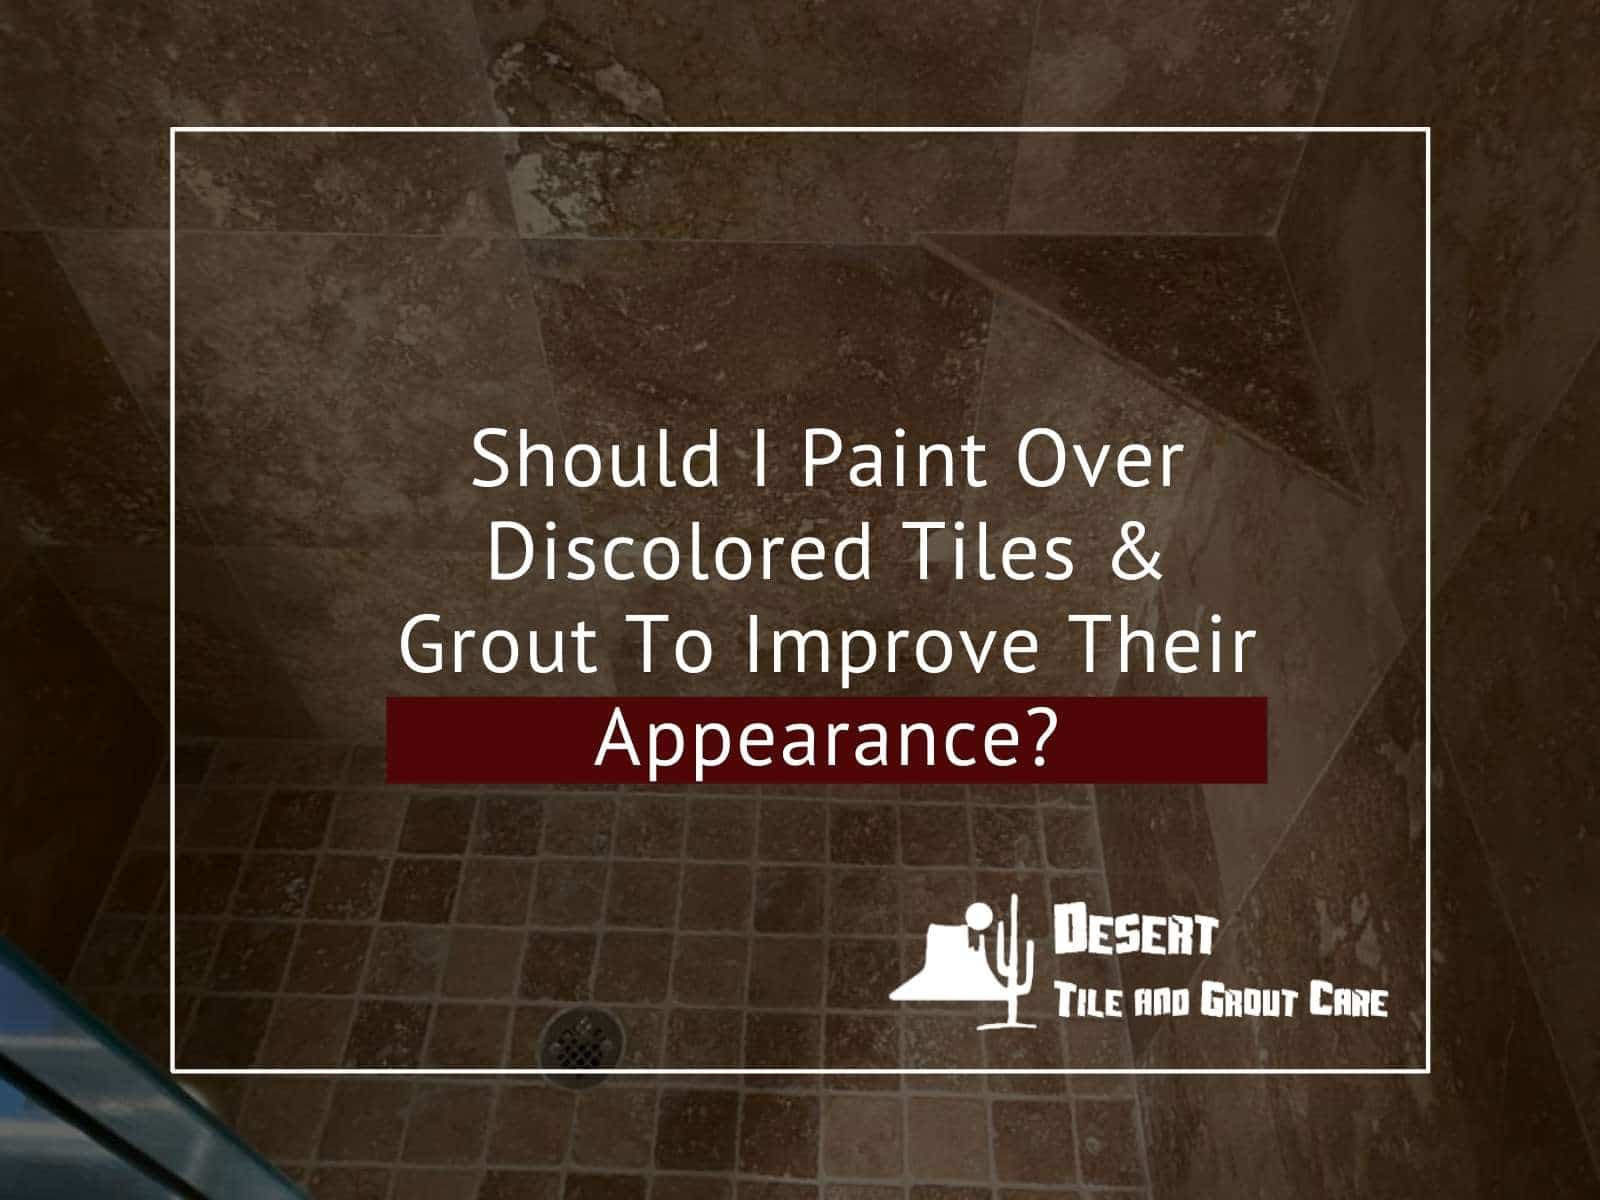 Should I Paint Over Discolored Tiles & Grout To Improve Their Appearance